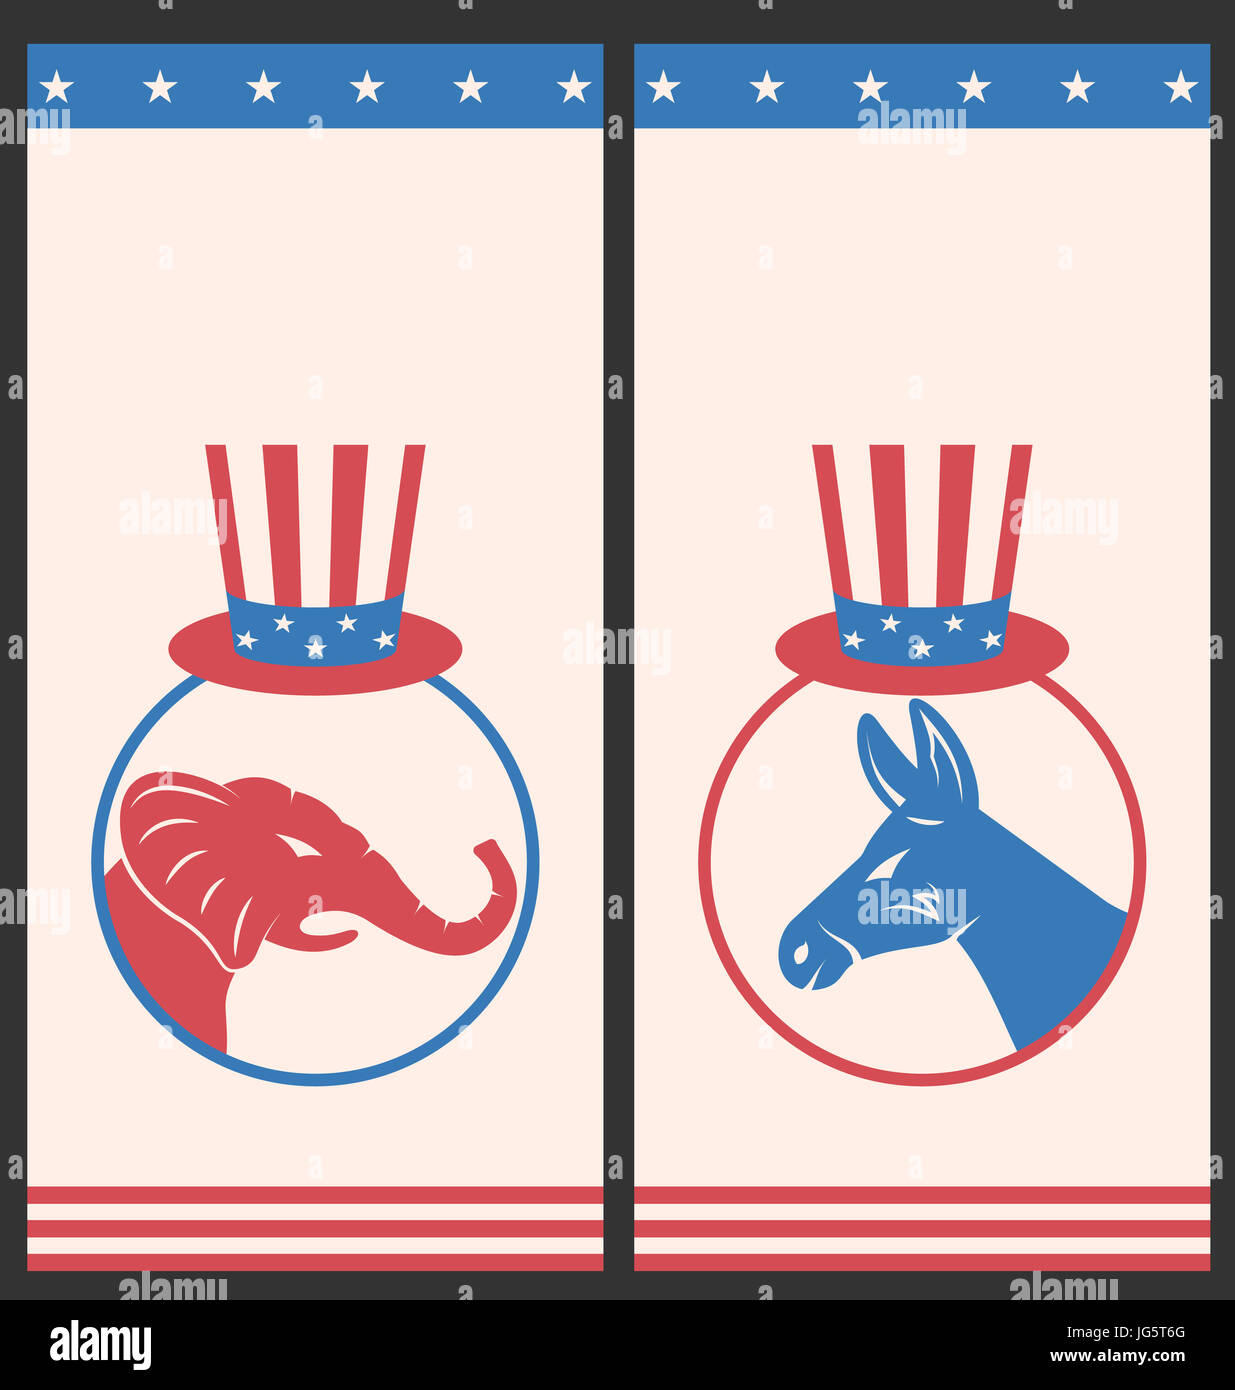 Illustration Banners for Advertise of United States Political Parties. Flyers with Donkey and Elephant. Vintage Style Design - Stock Photo